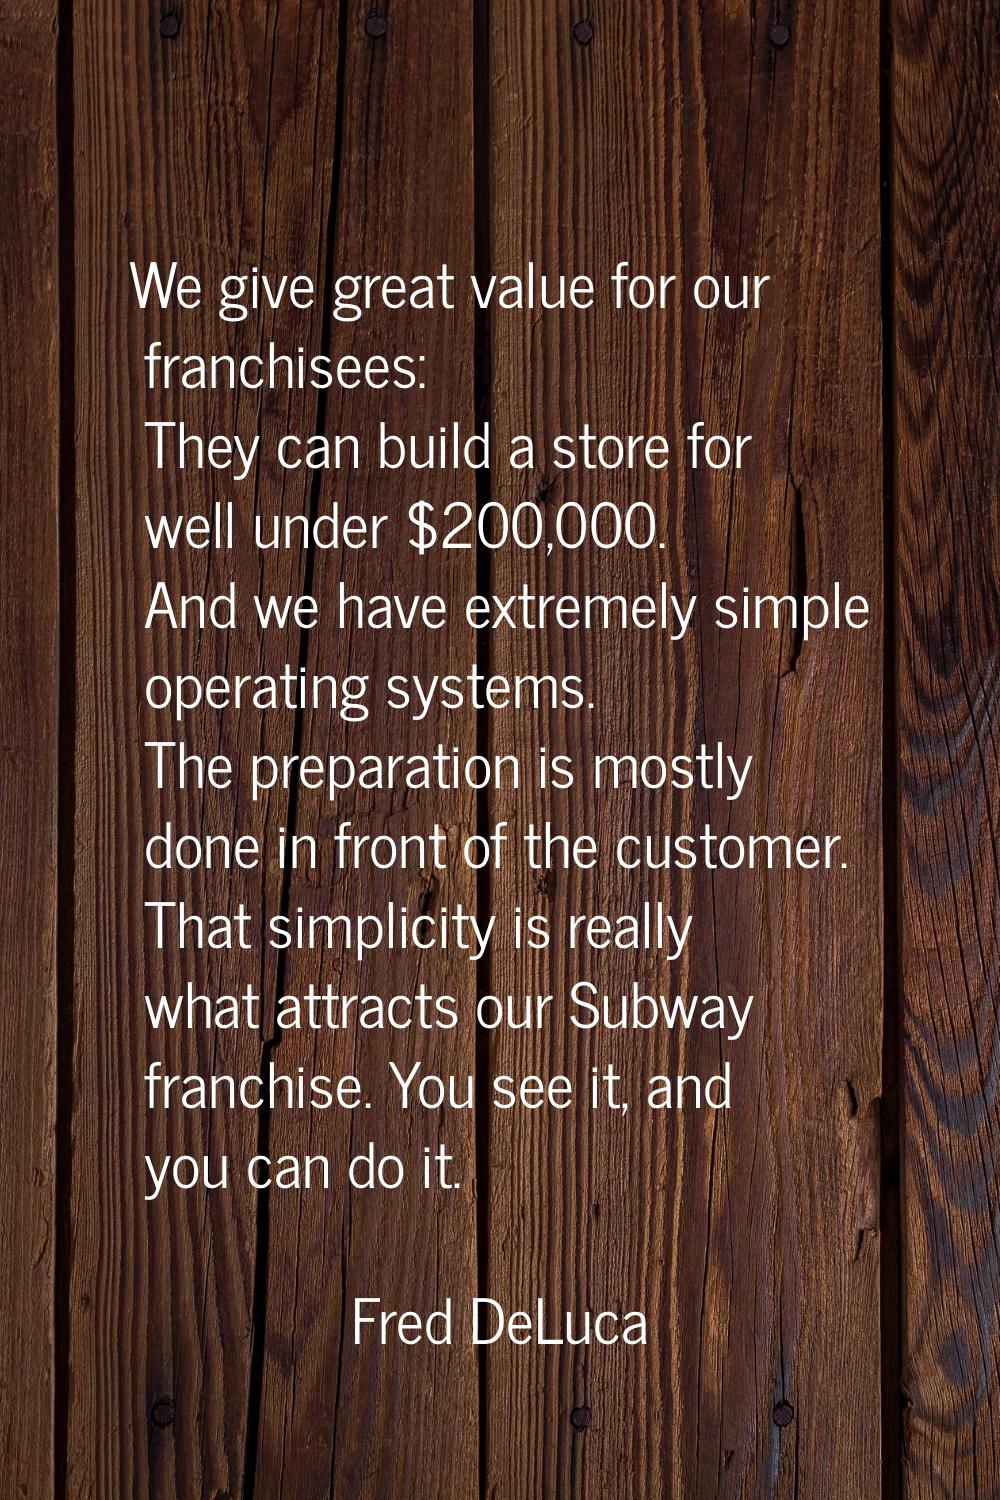 We give great value for our franchisees: They can build a store for well under $200,000. And we hav